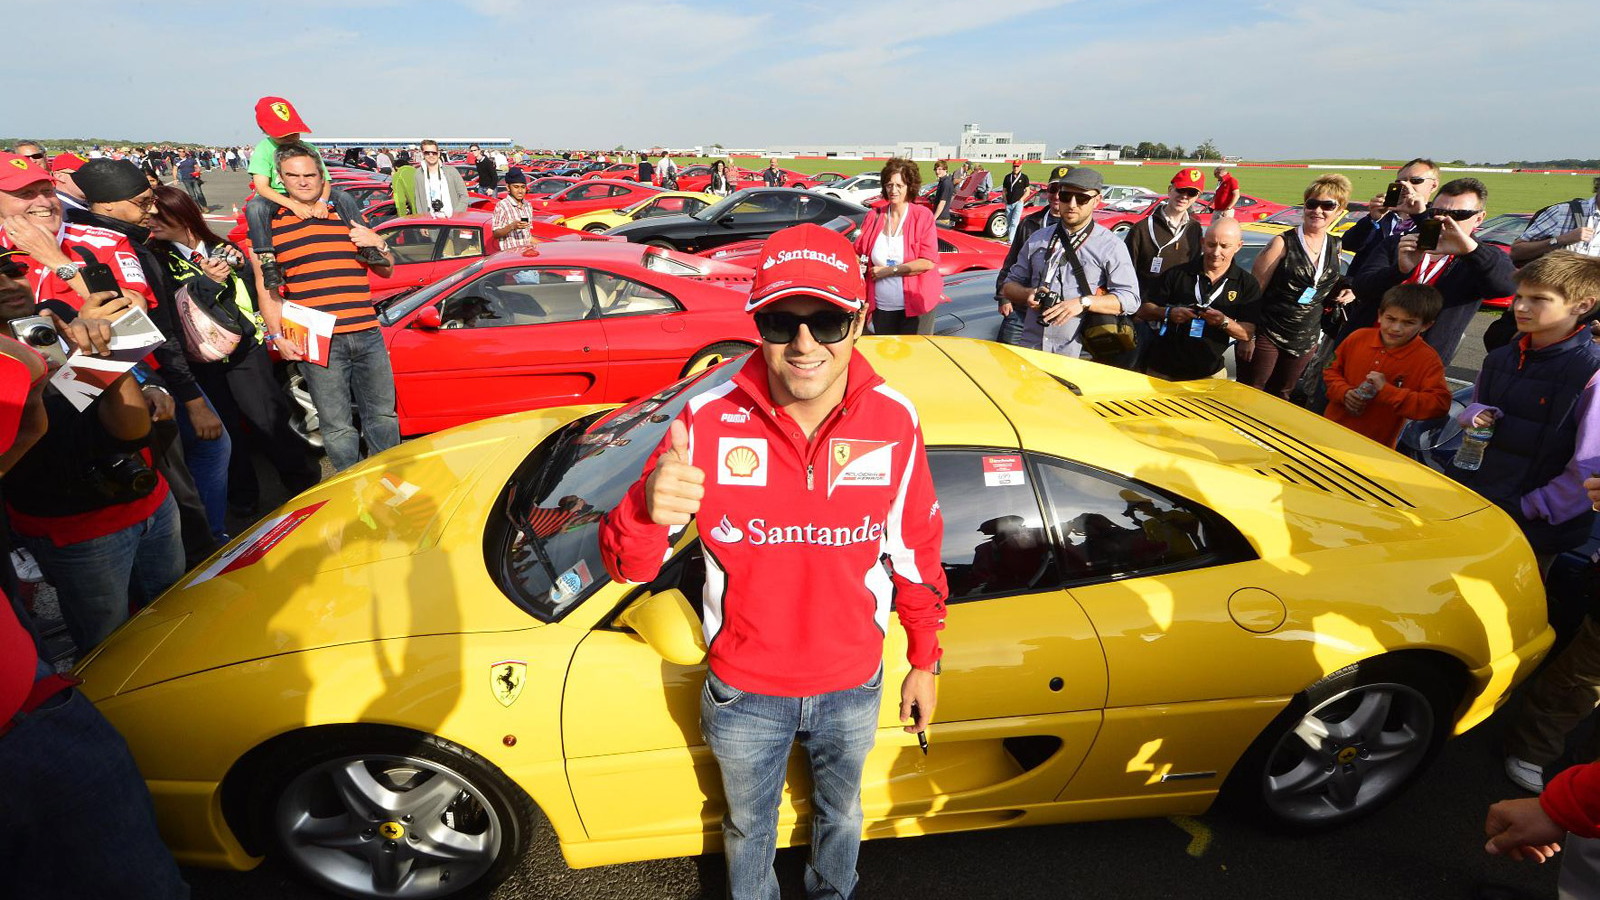 Gathering of 964 Ferraris at Silverstone in the UK have set a new world record